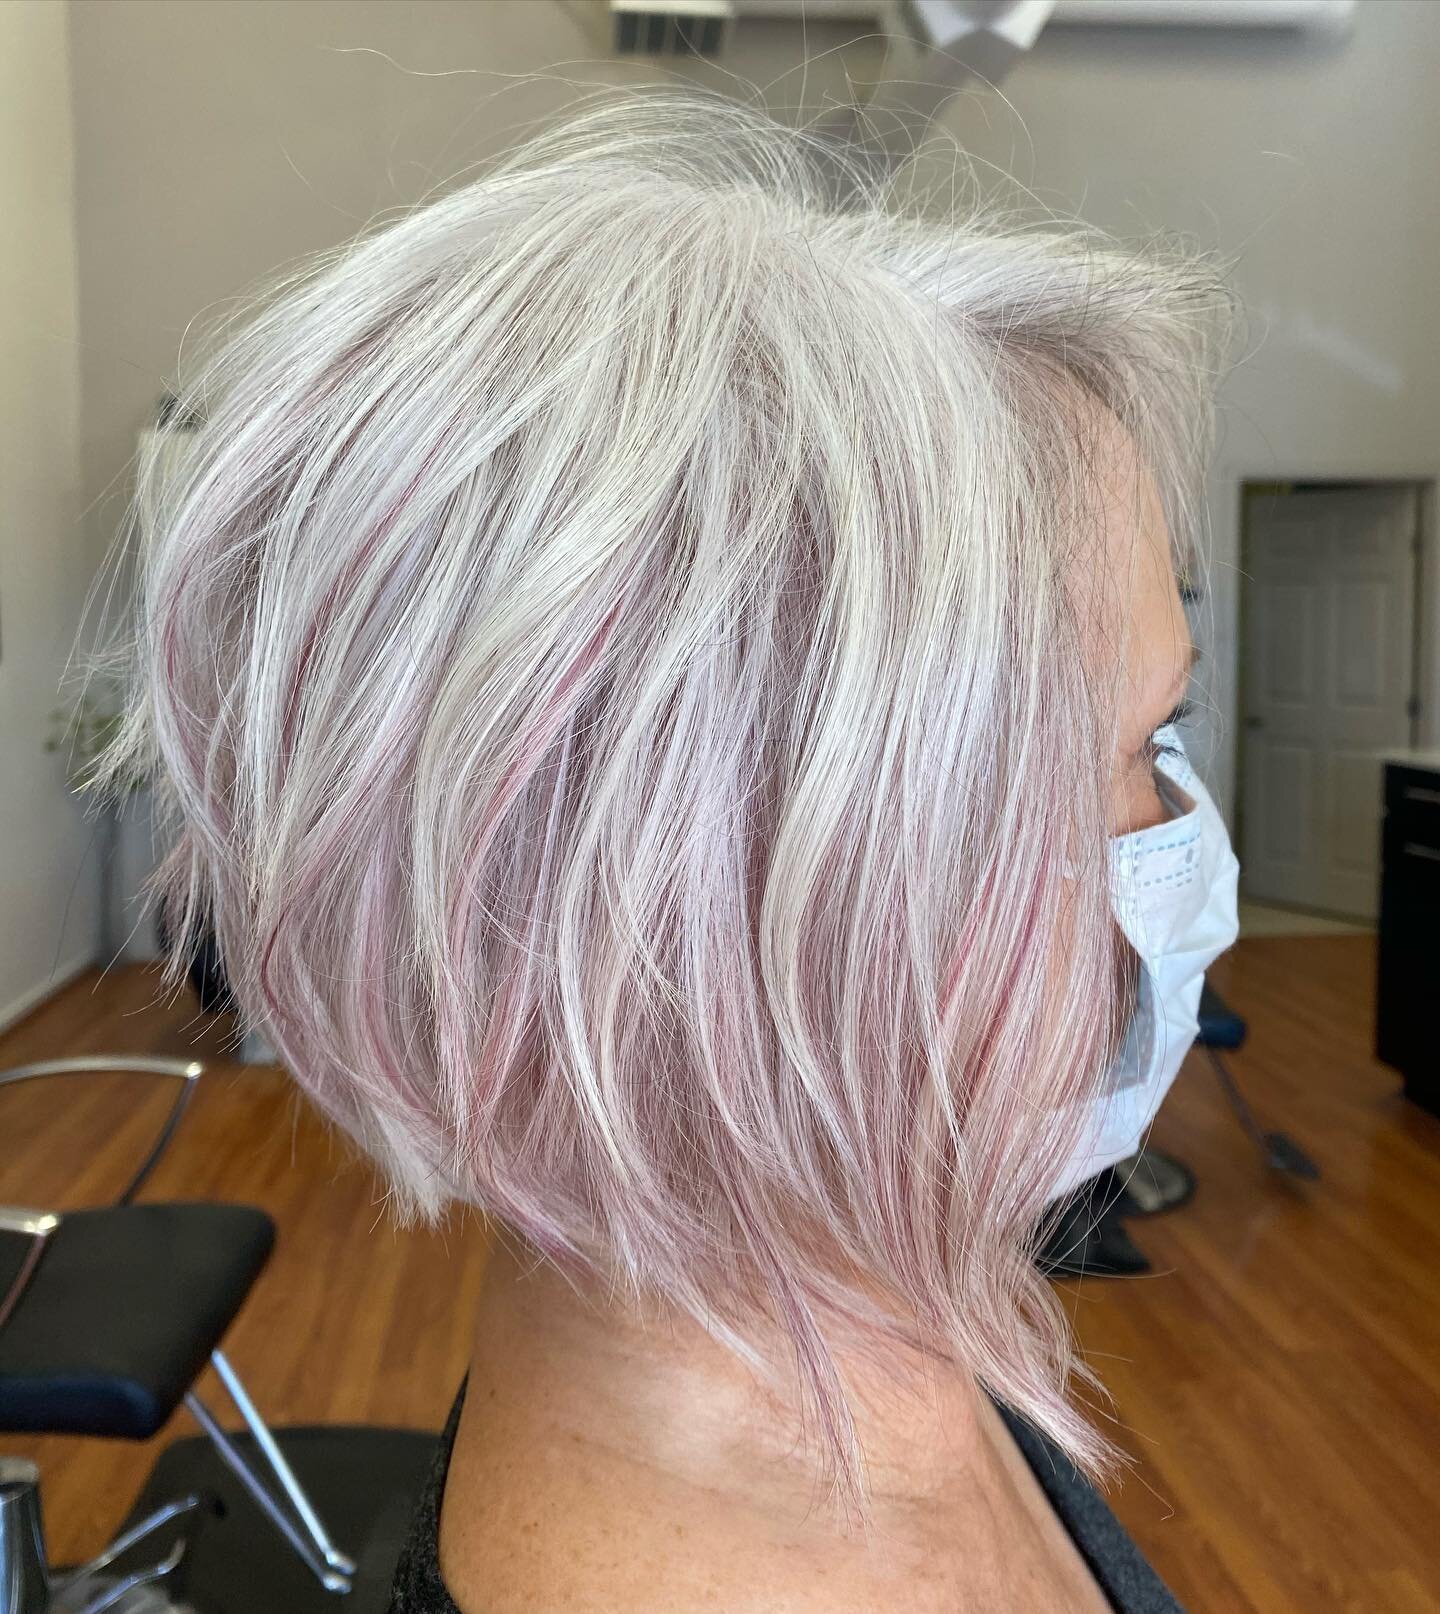 Happily creating custom colour formulas!

When a client requests Pink that lasts longer than a toner, but doesn&rsquo;t  permanently stain the hair shaft like a direct dye... 

COLOR.ME BY KEVIN MURPHY is our choice of colour line. The options are en